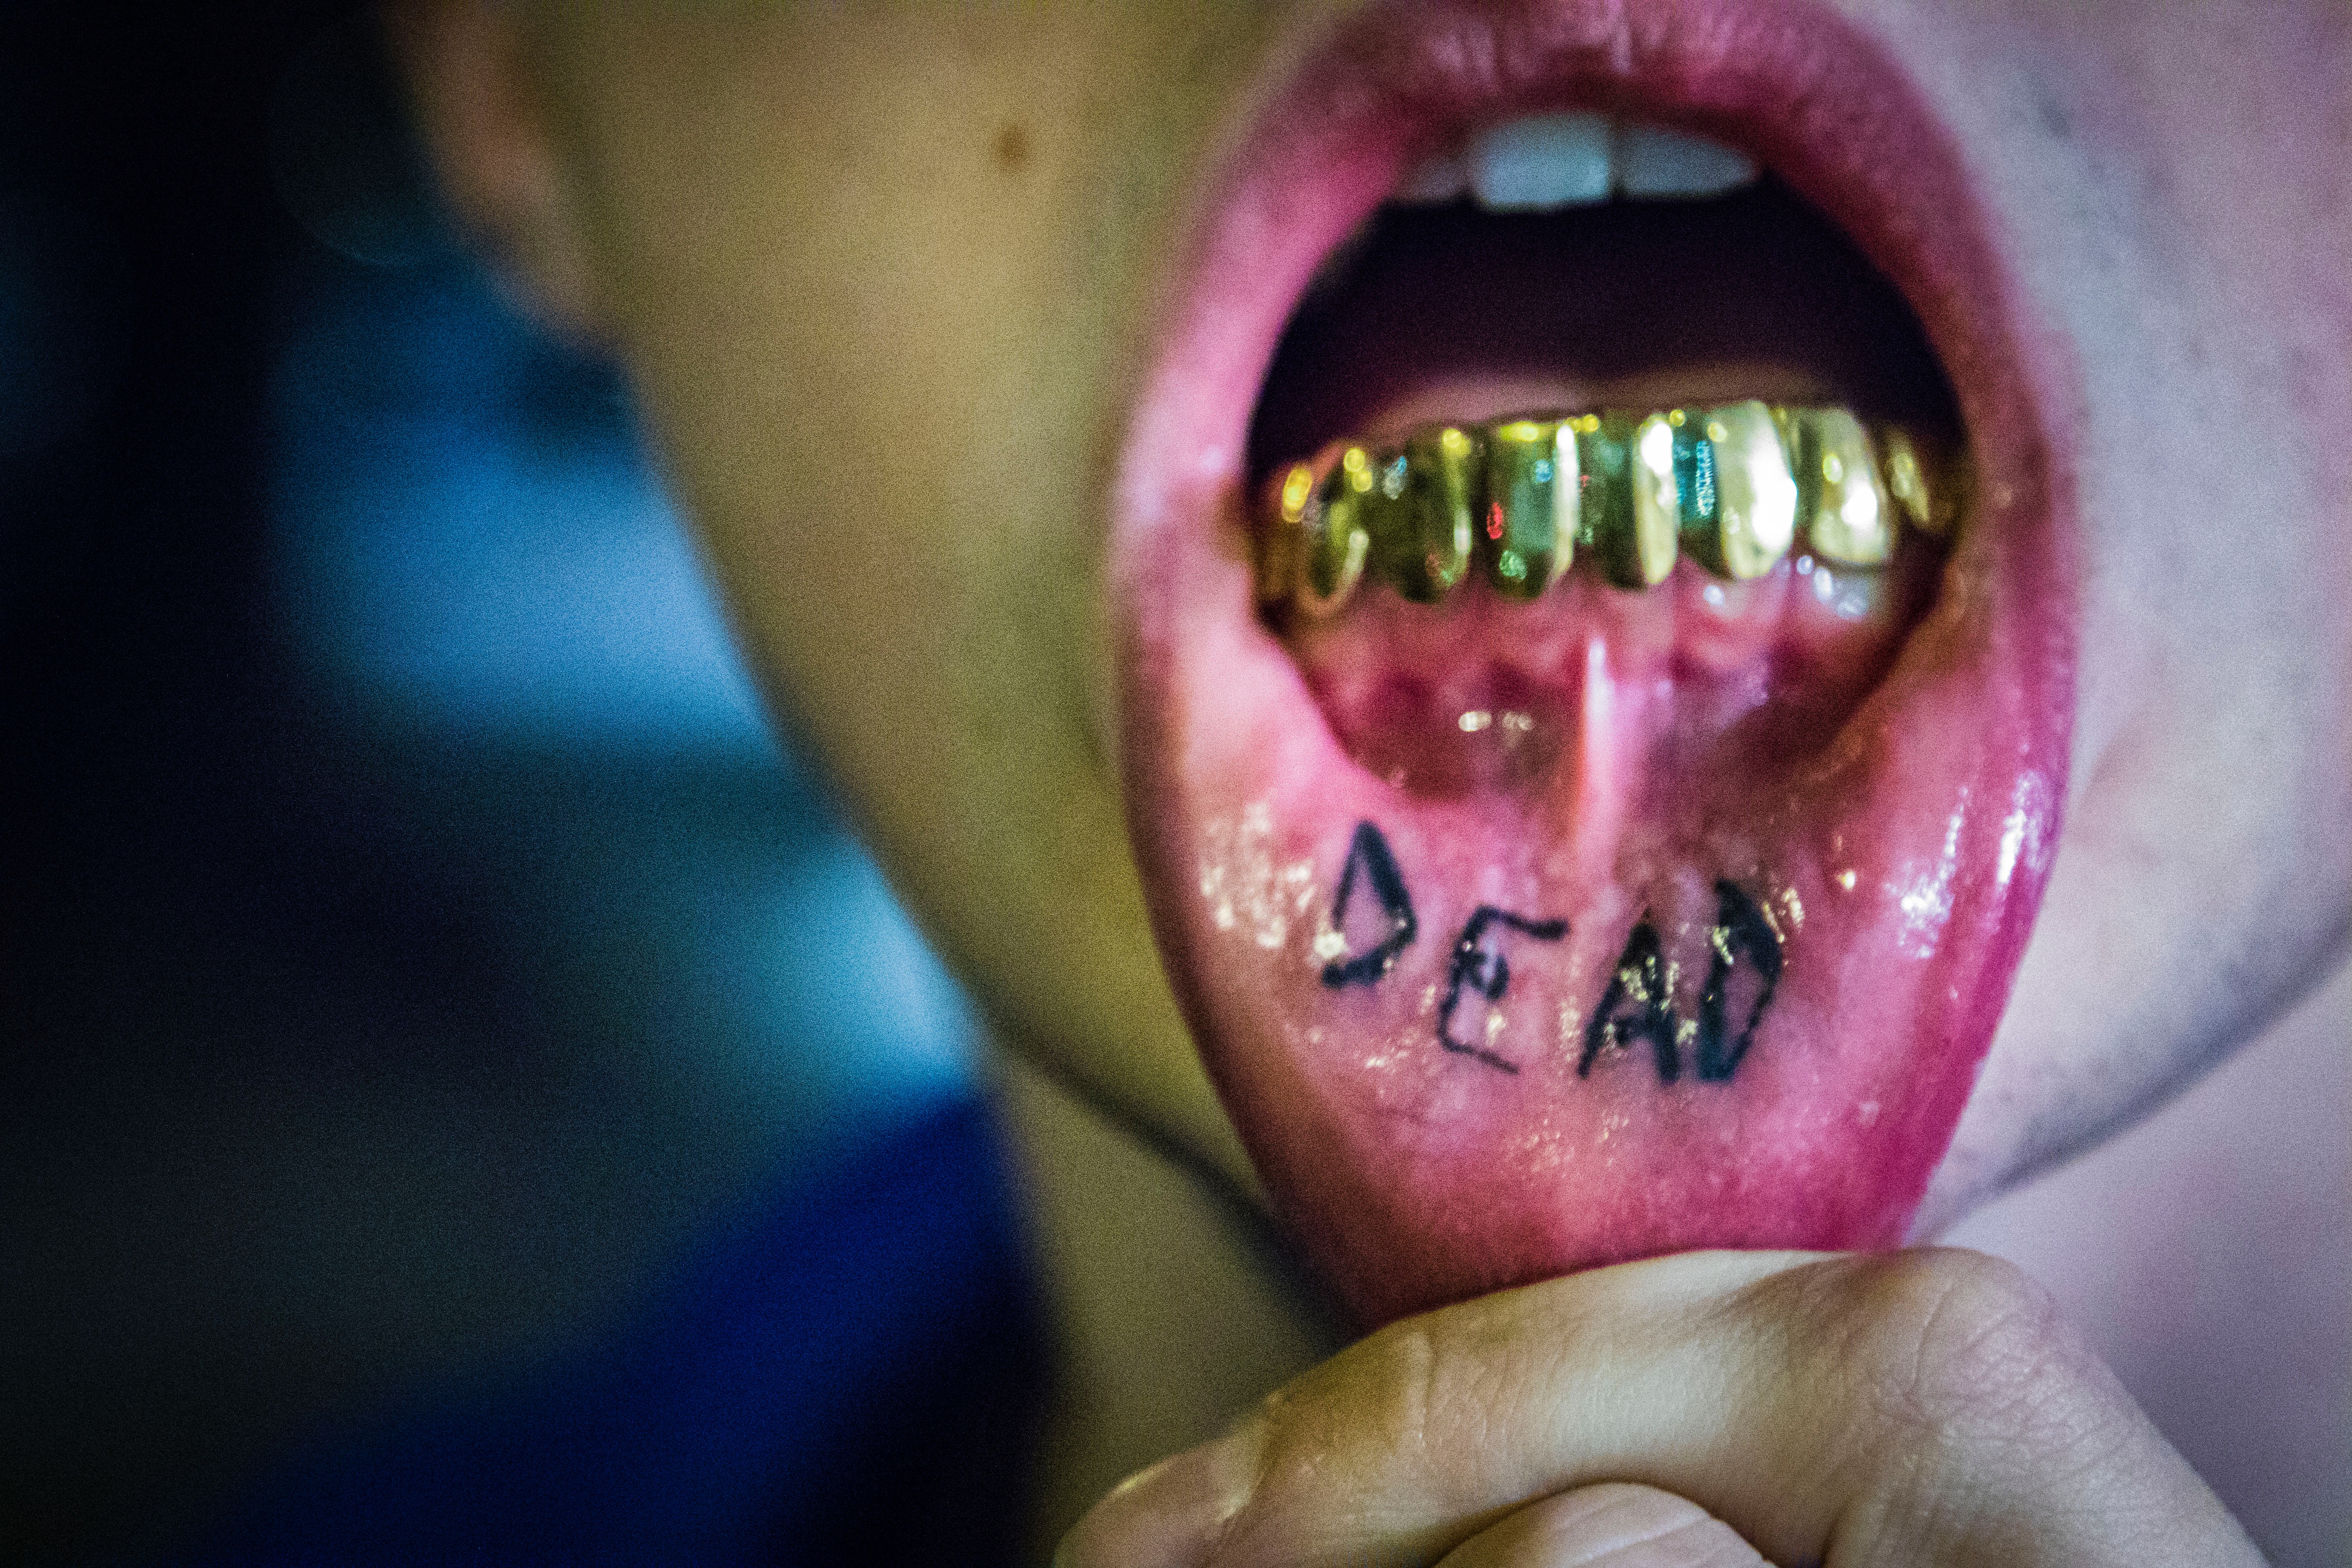 Photography of man showing tattoo and gold teeth